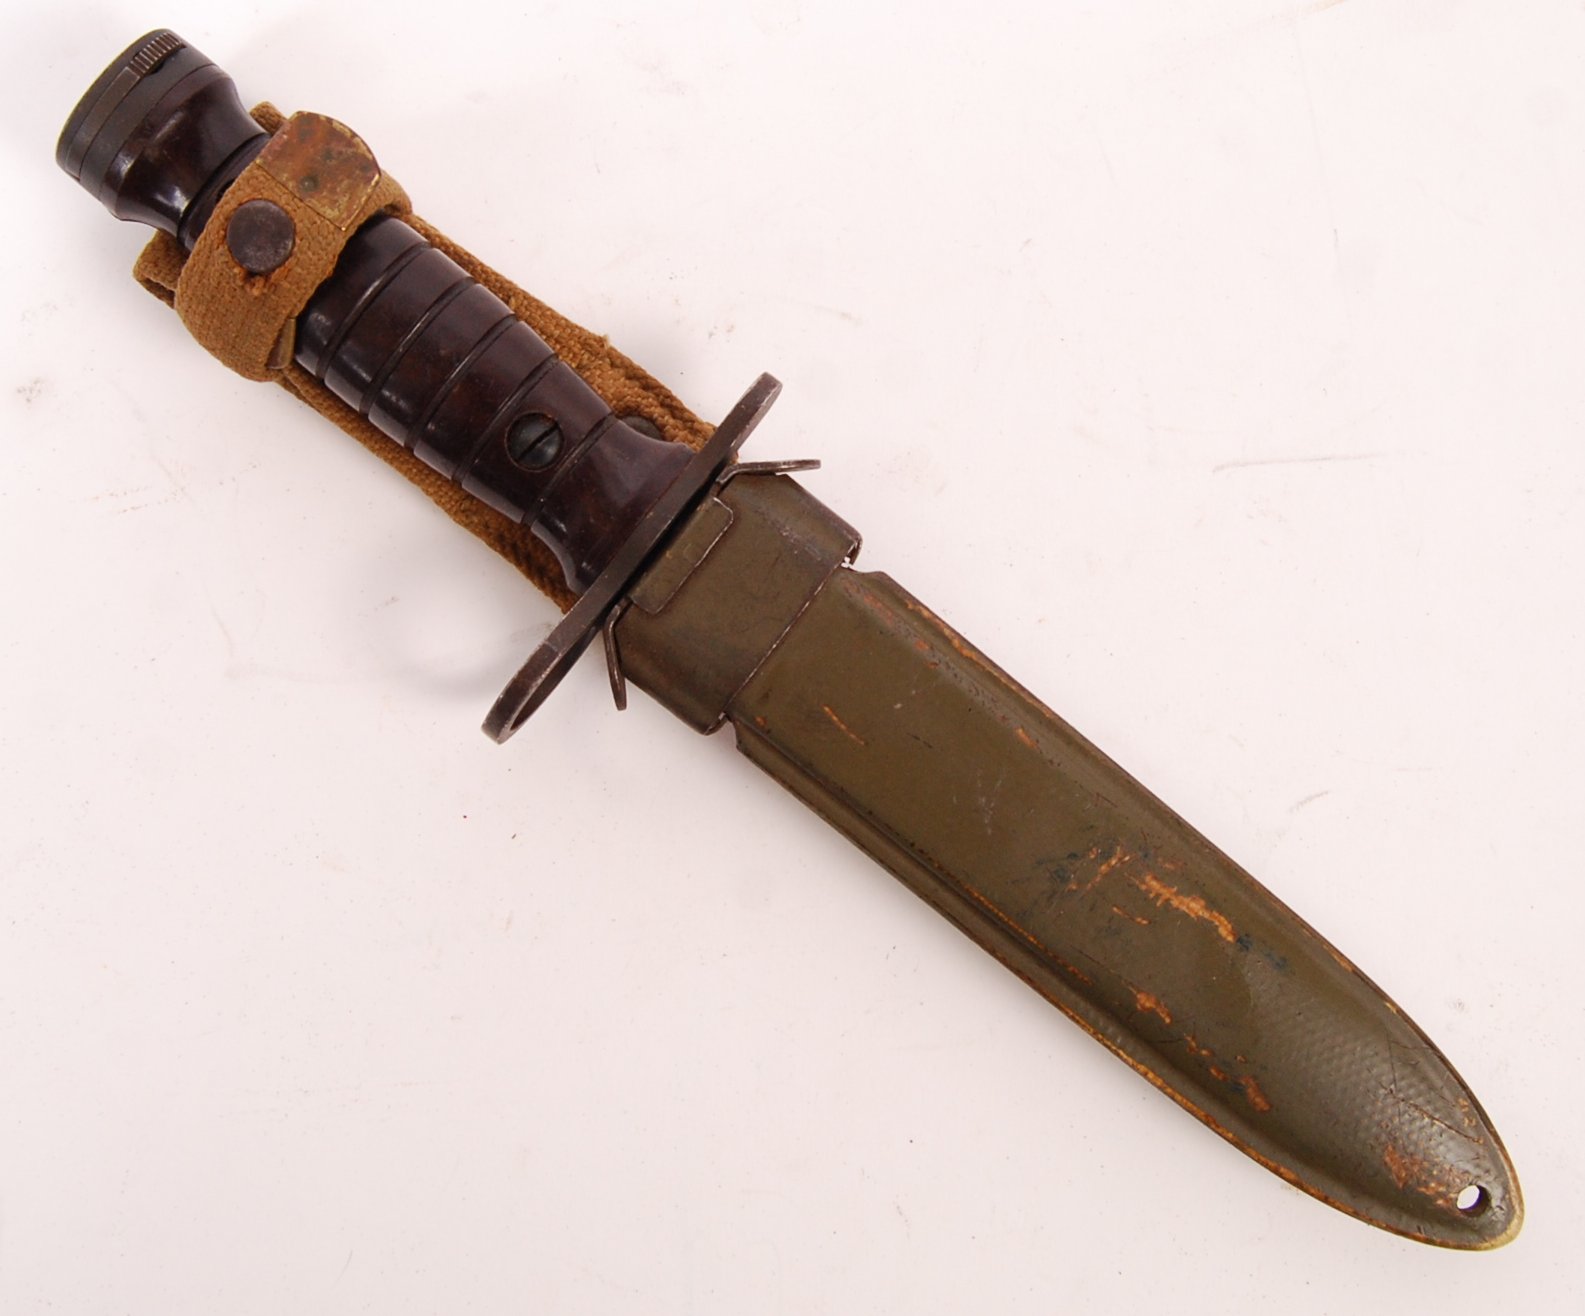 20TH CENTURY US M4 RIFLE BAYONET FOR M1 CARBINE - Image 4 of 5